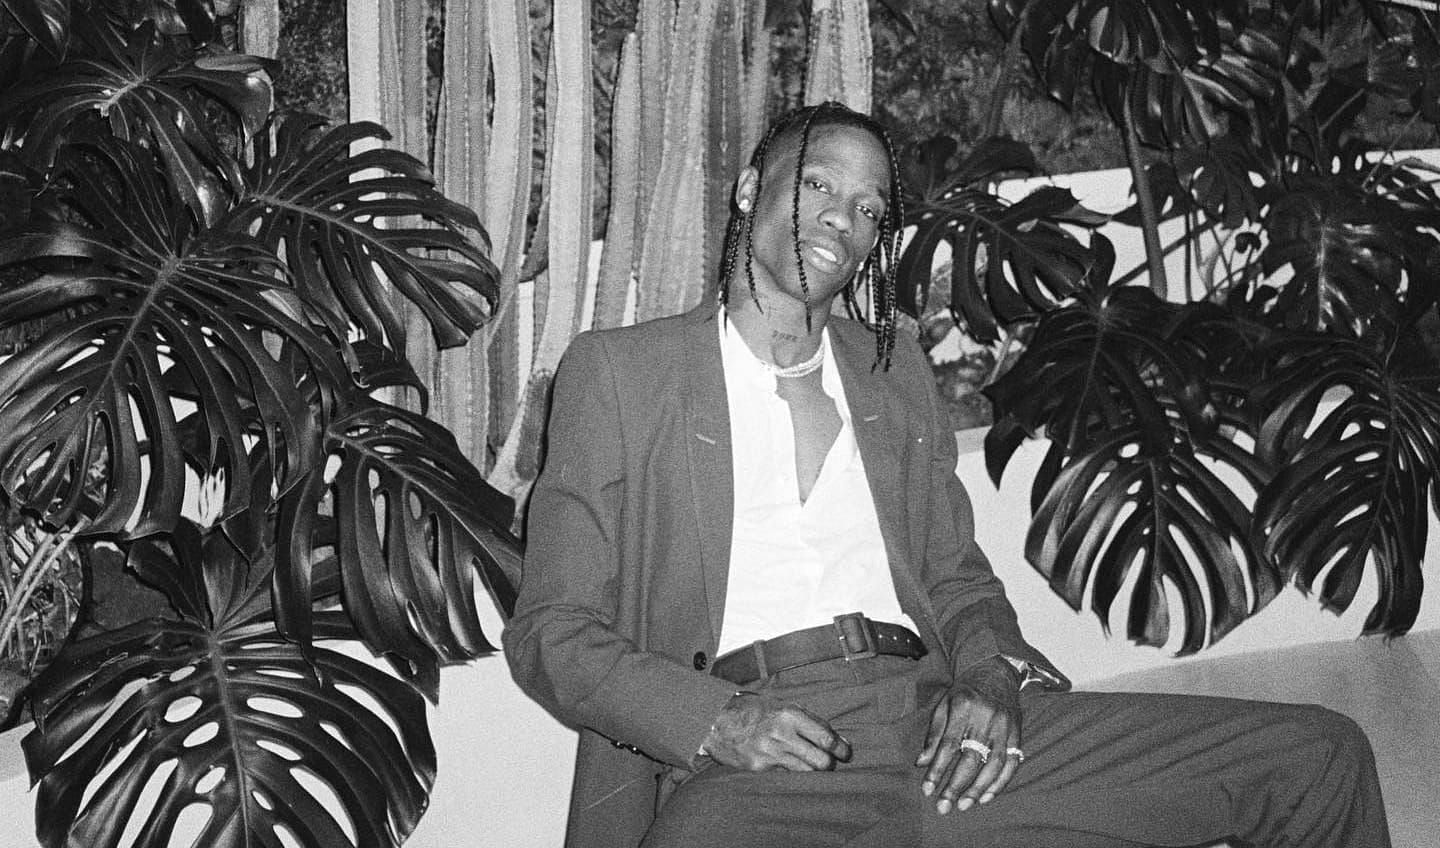 Travis Scott and ASAP Rocky are dating the Jenner sisters!